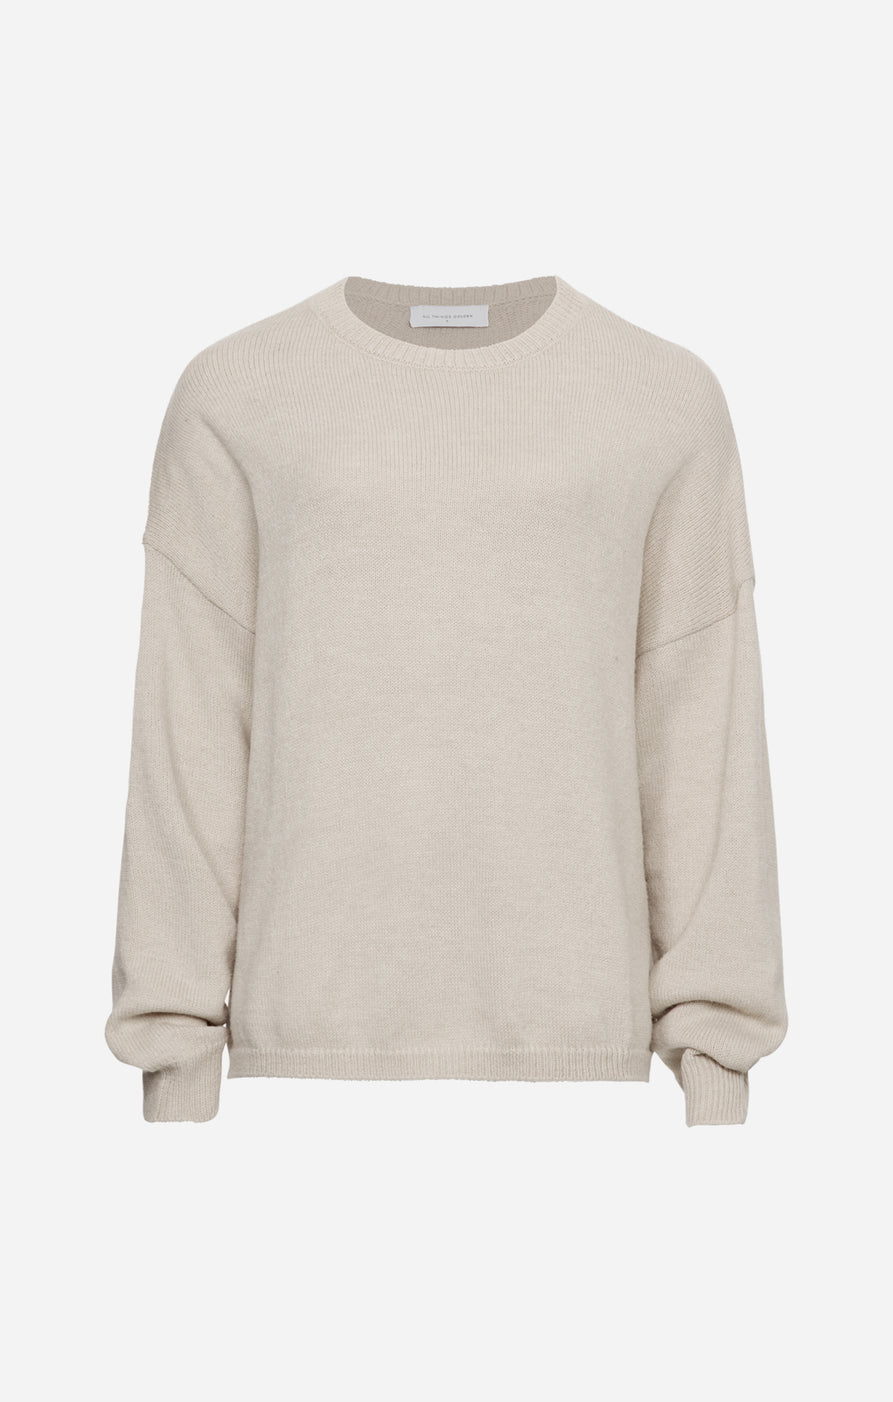 THE UNIVERSAL KNIT - BEIGE